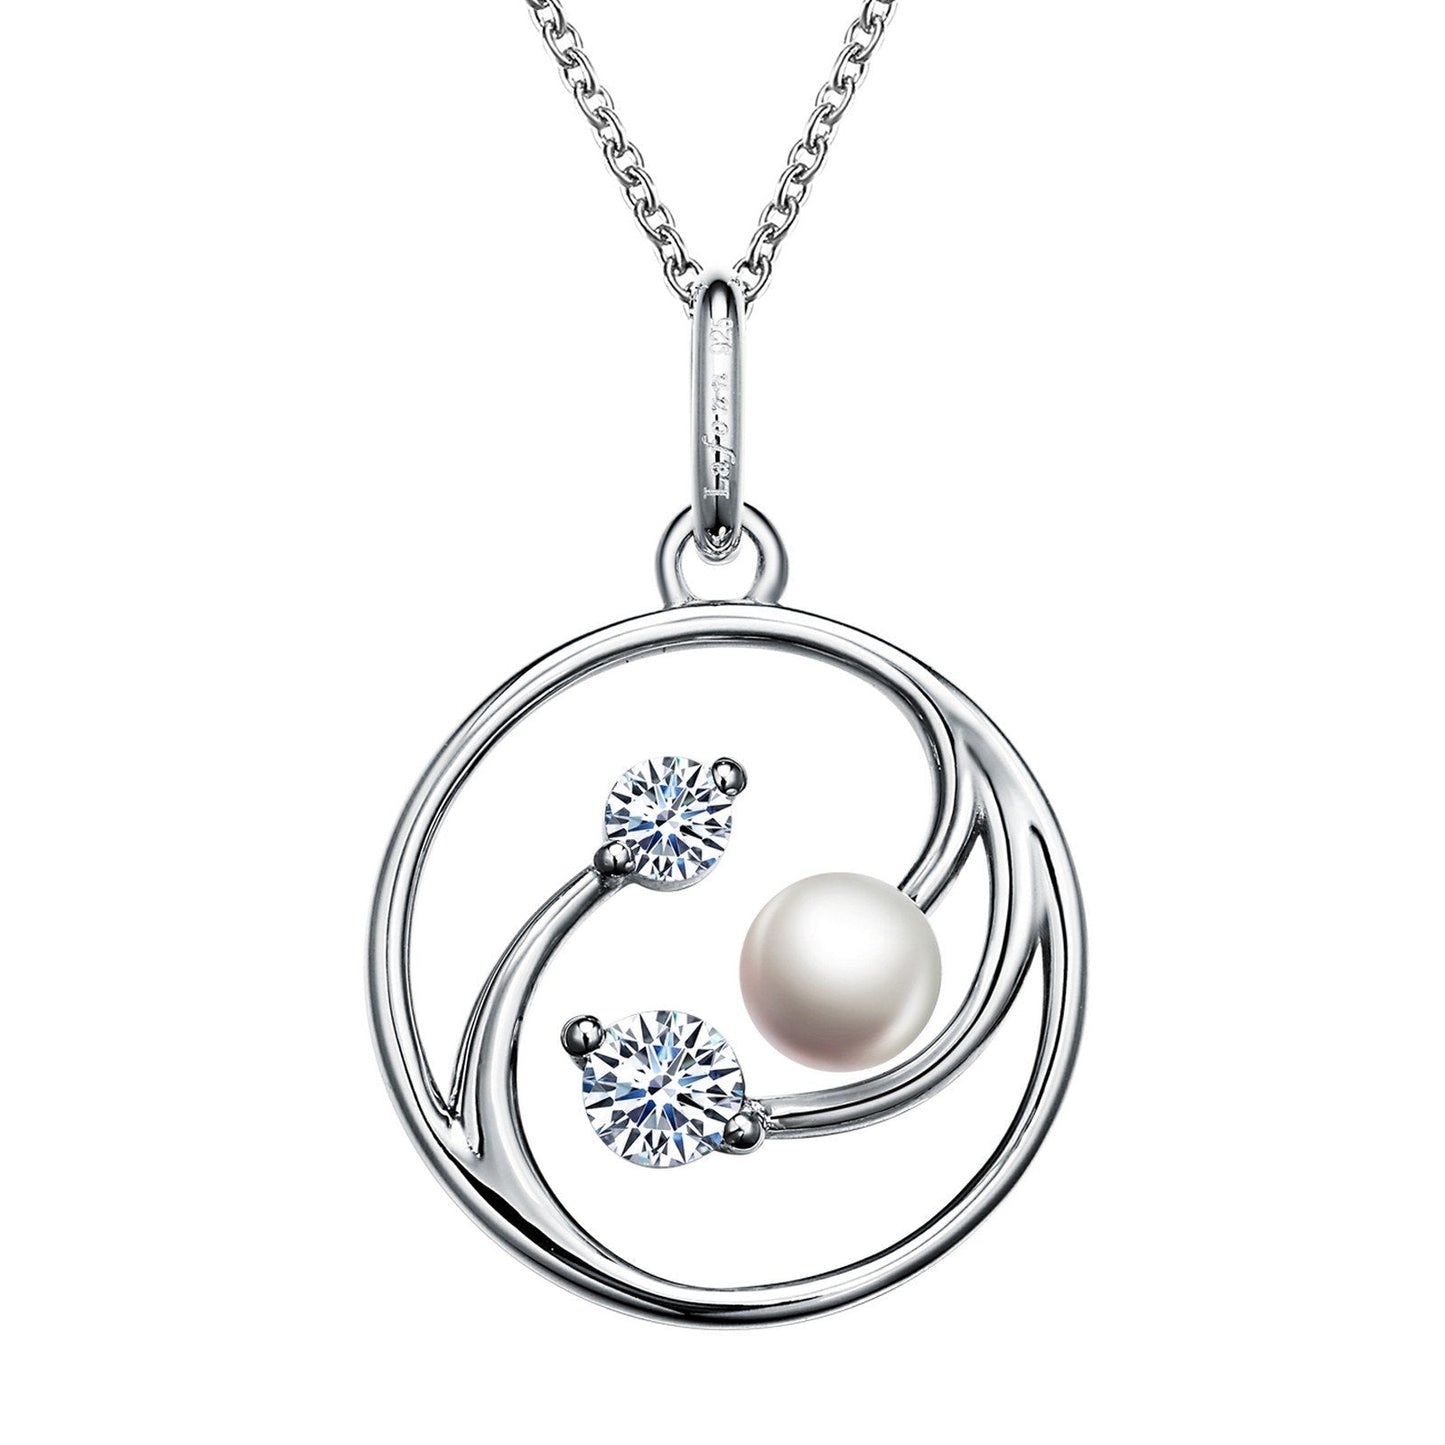 LaFonn Platinum Freshwater Pearl N/A NECKLACES Cultured Freshwater Pearl Necklace